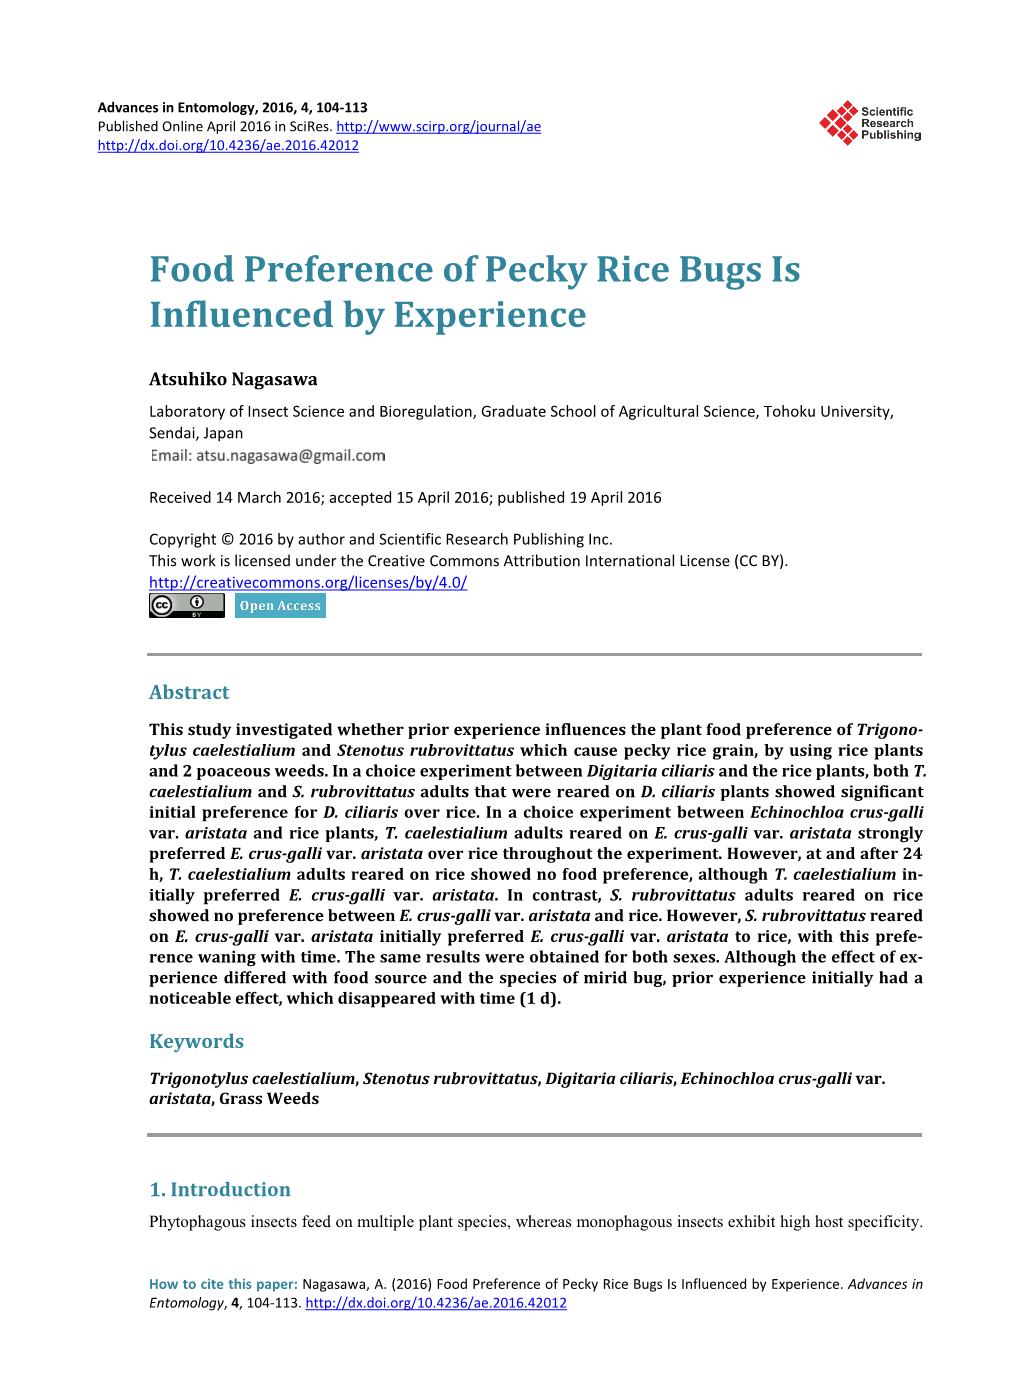 Food Preference of Pecky Rice Bugs Is Influenced by Experience